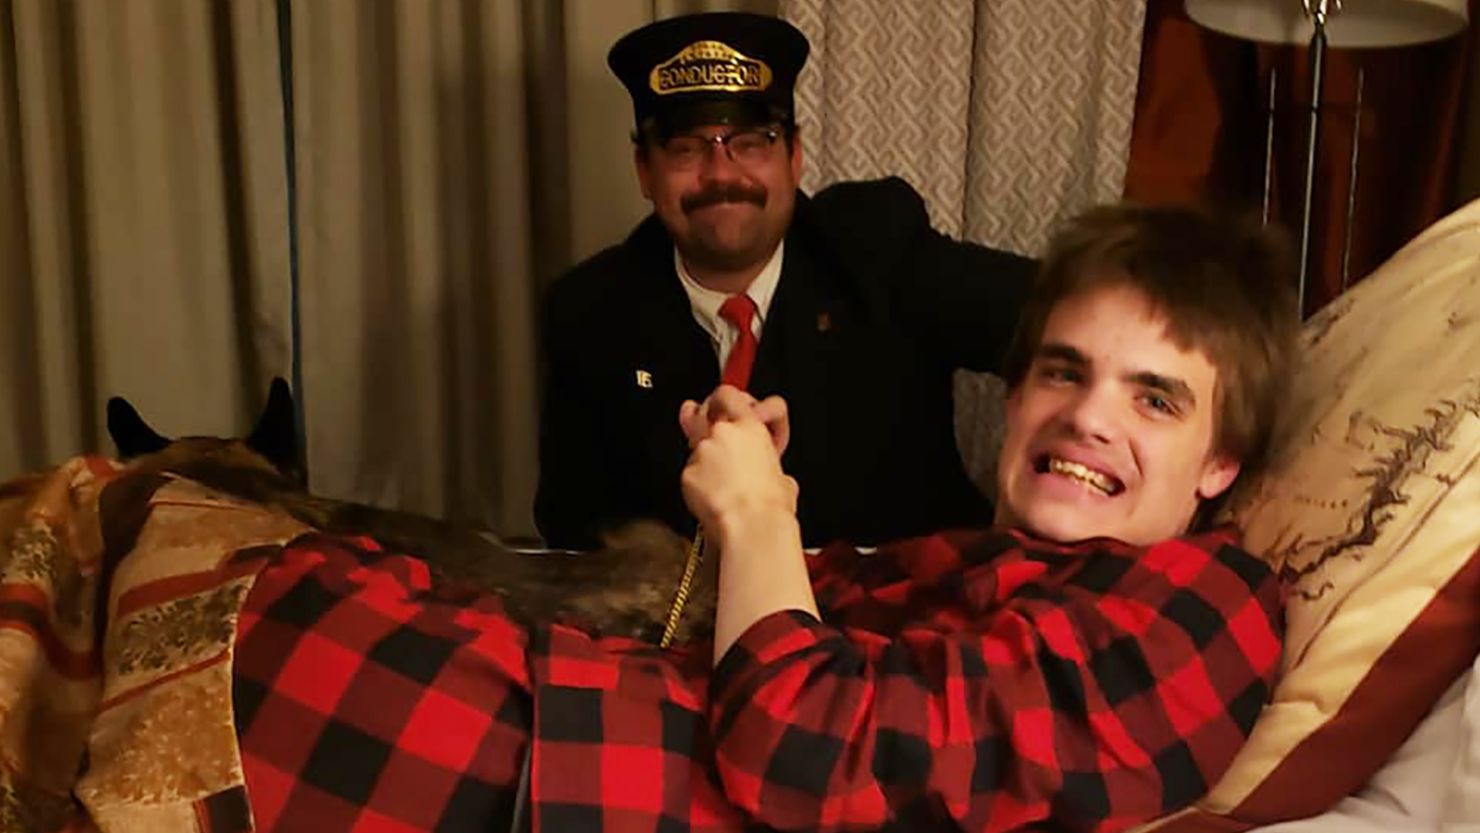 A teen with autism had a magical 'Polar Express' experience, even